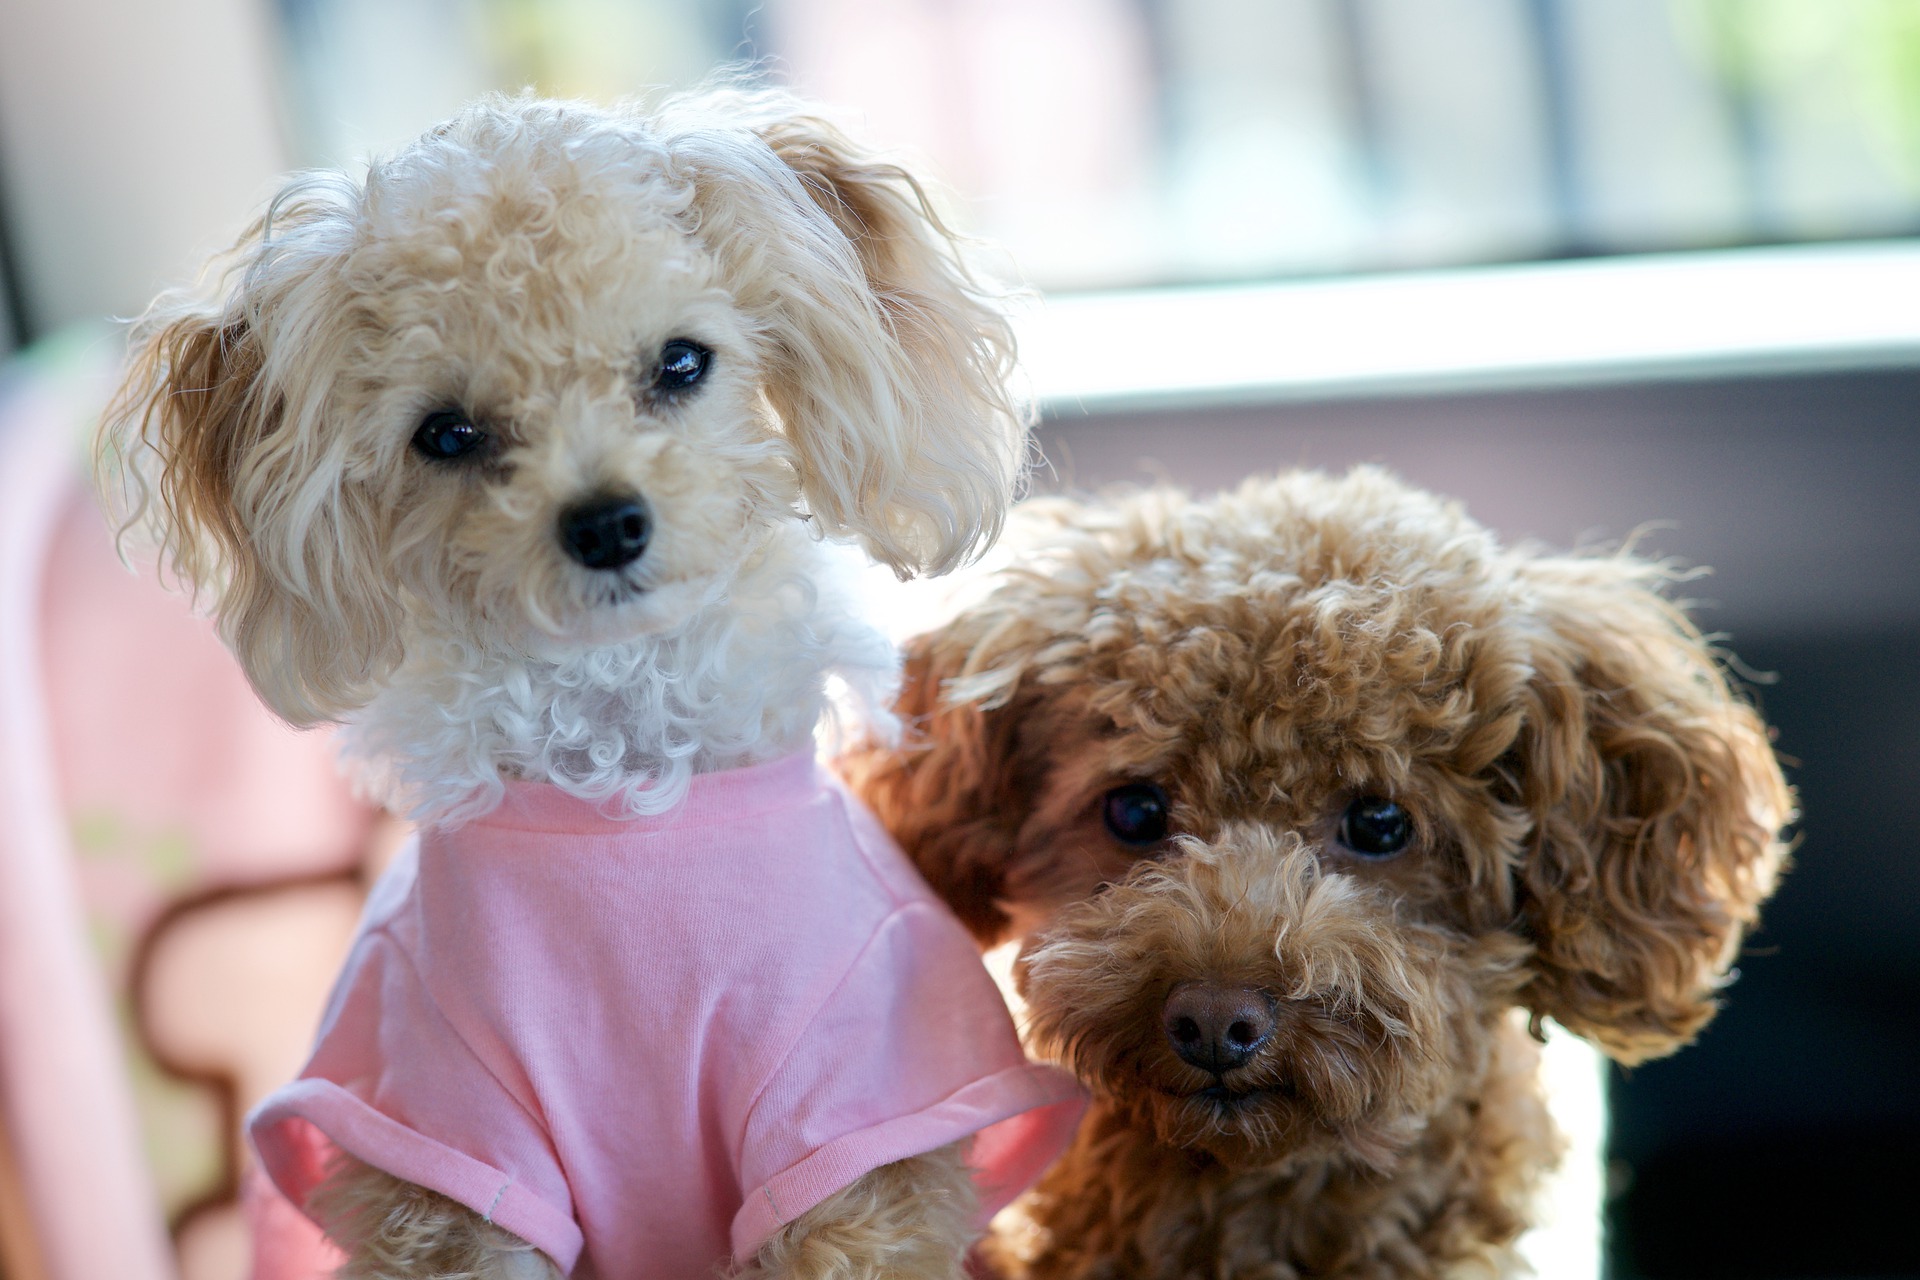 Full Grown Teacup Poodle: All You Need to Know + Irresistible Photos!